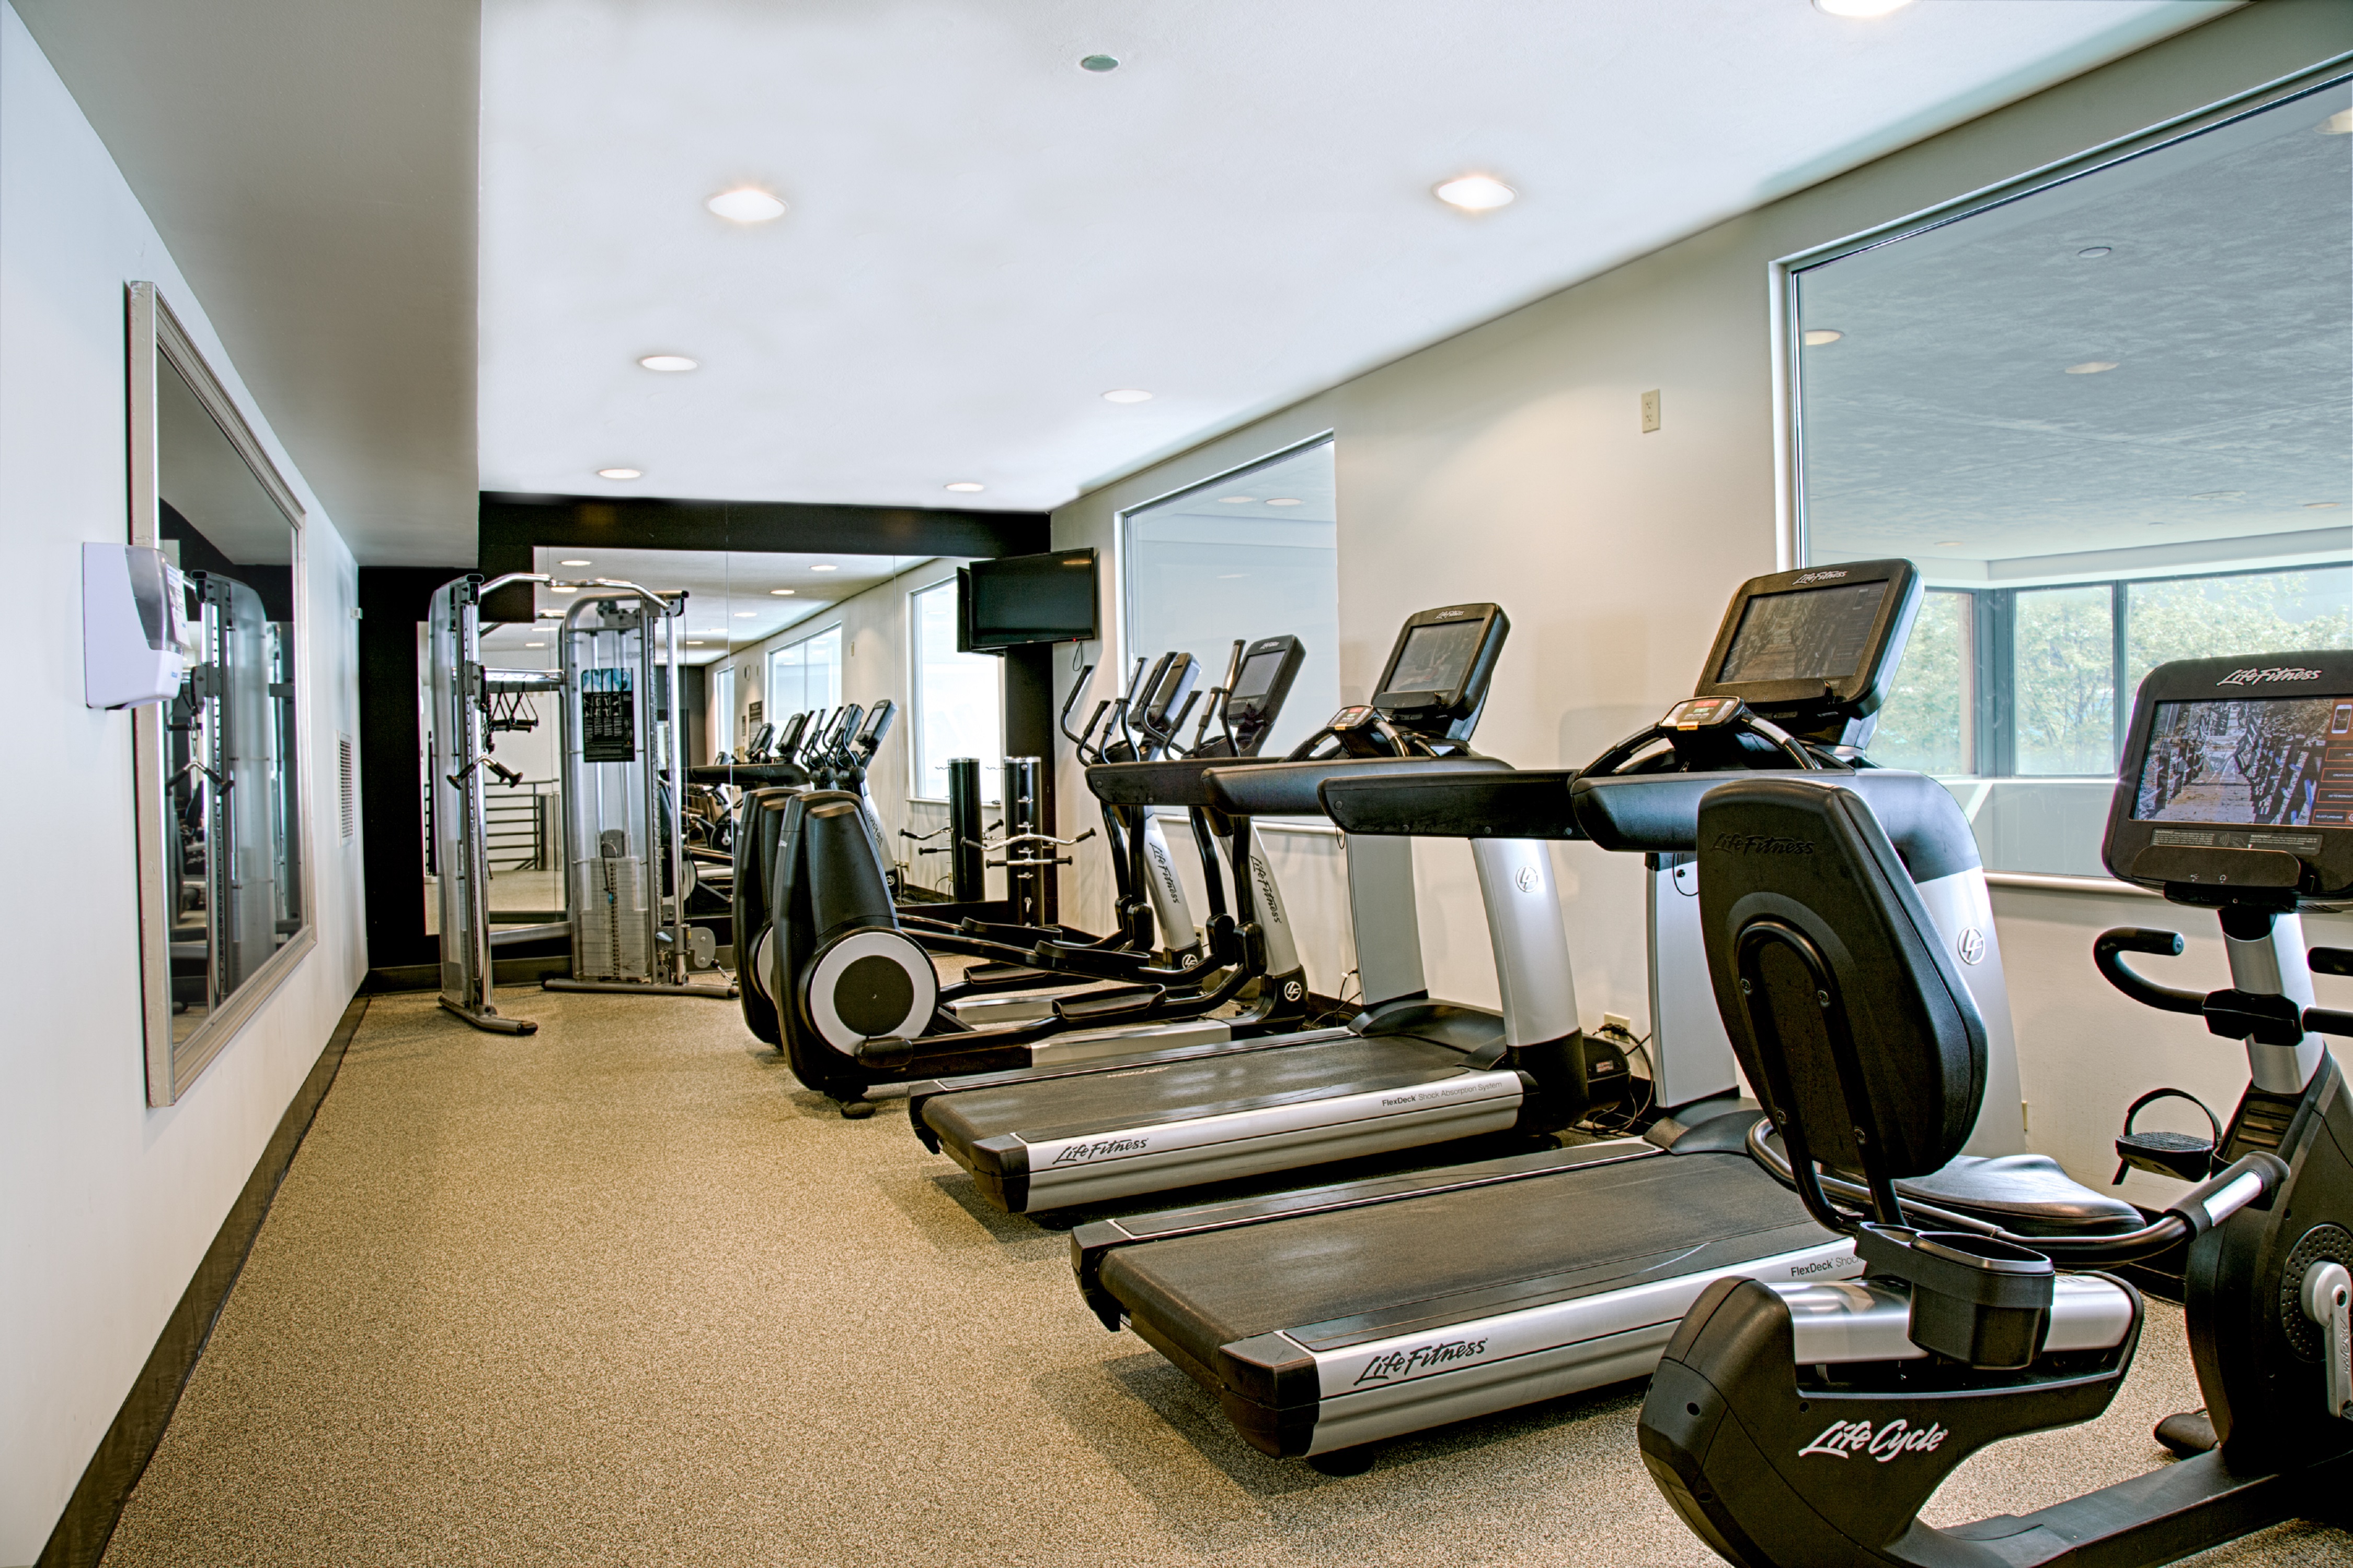 Fitness Room with exercise machines